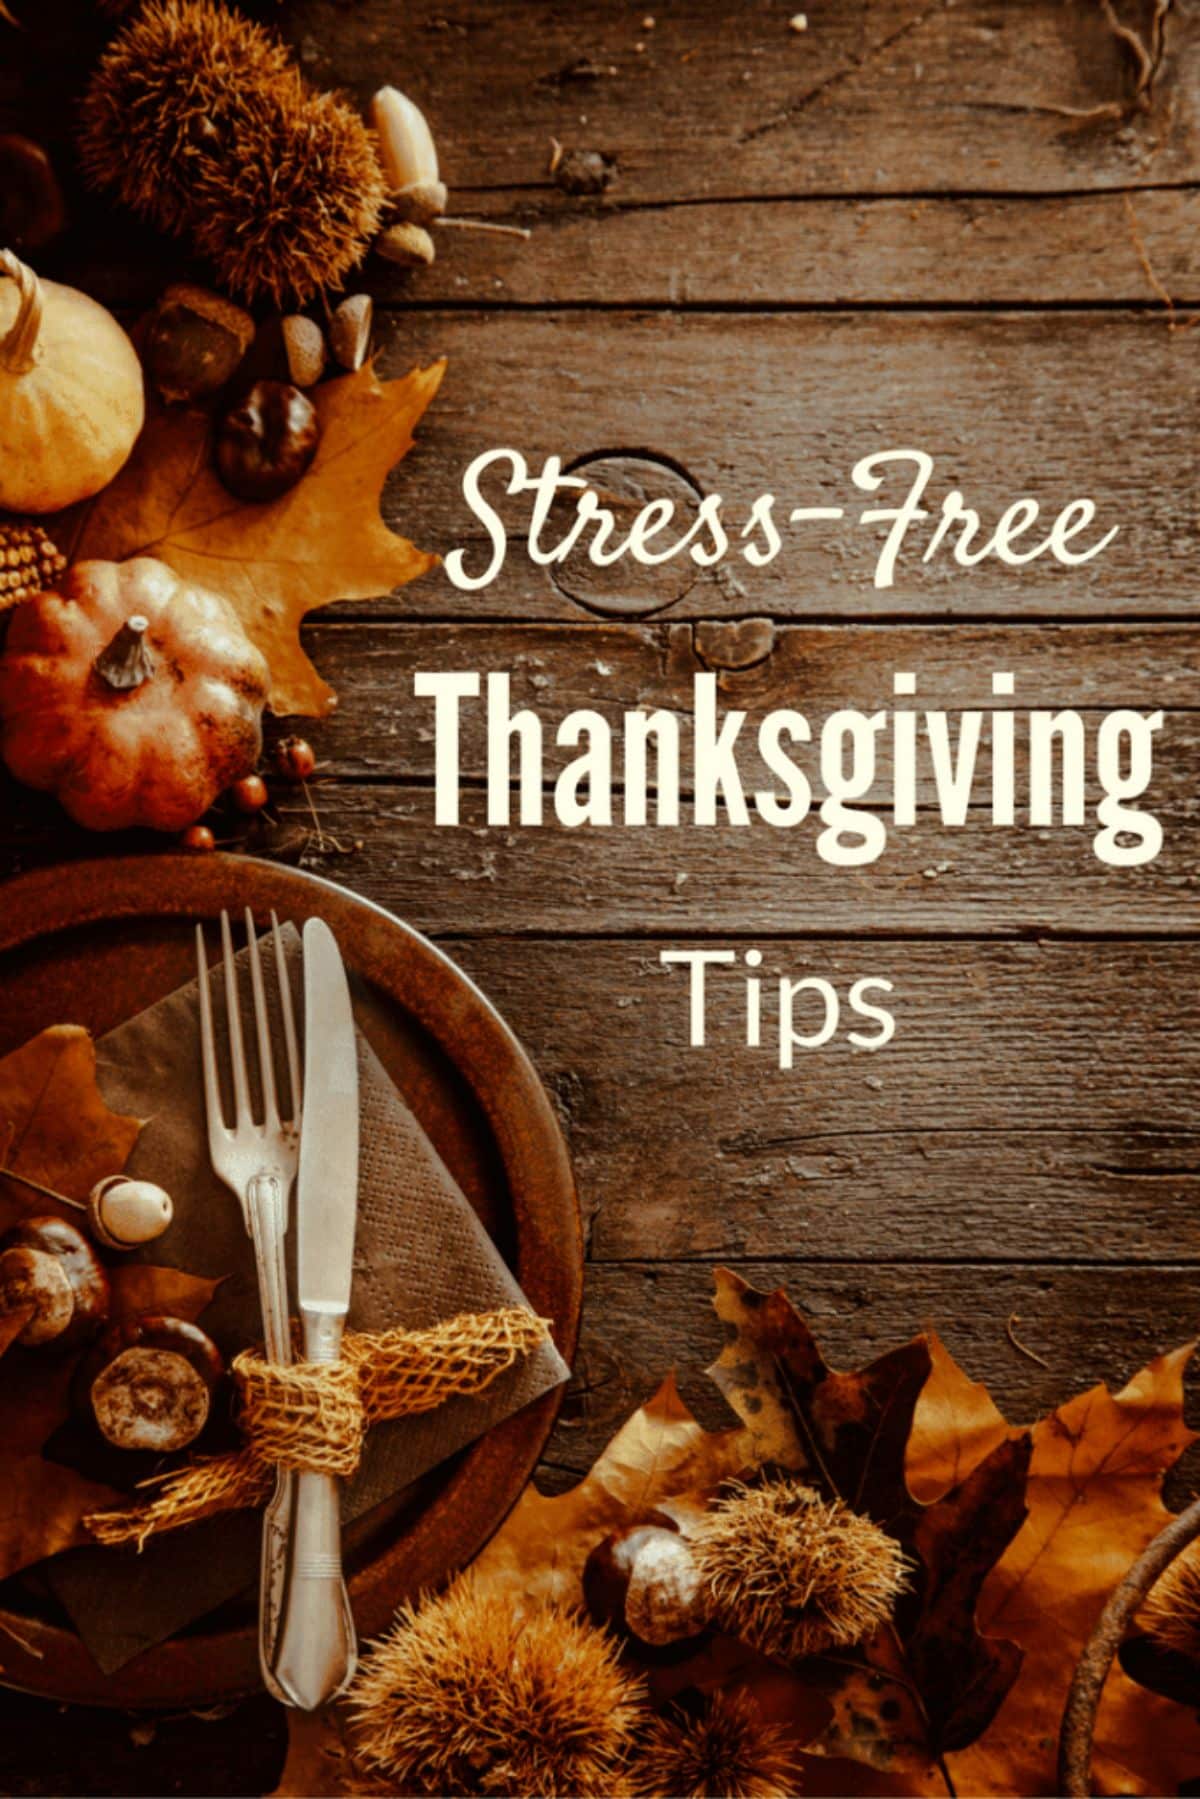 Stress-free Thanksgiving tips for a hassle-free holiday.